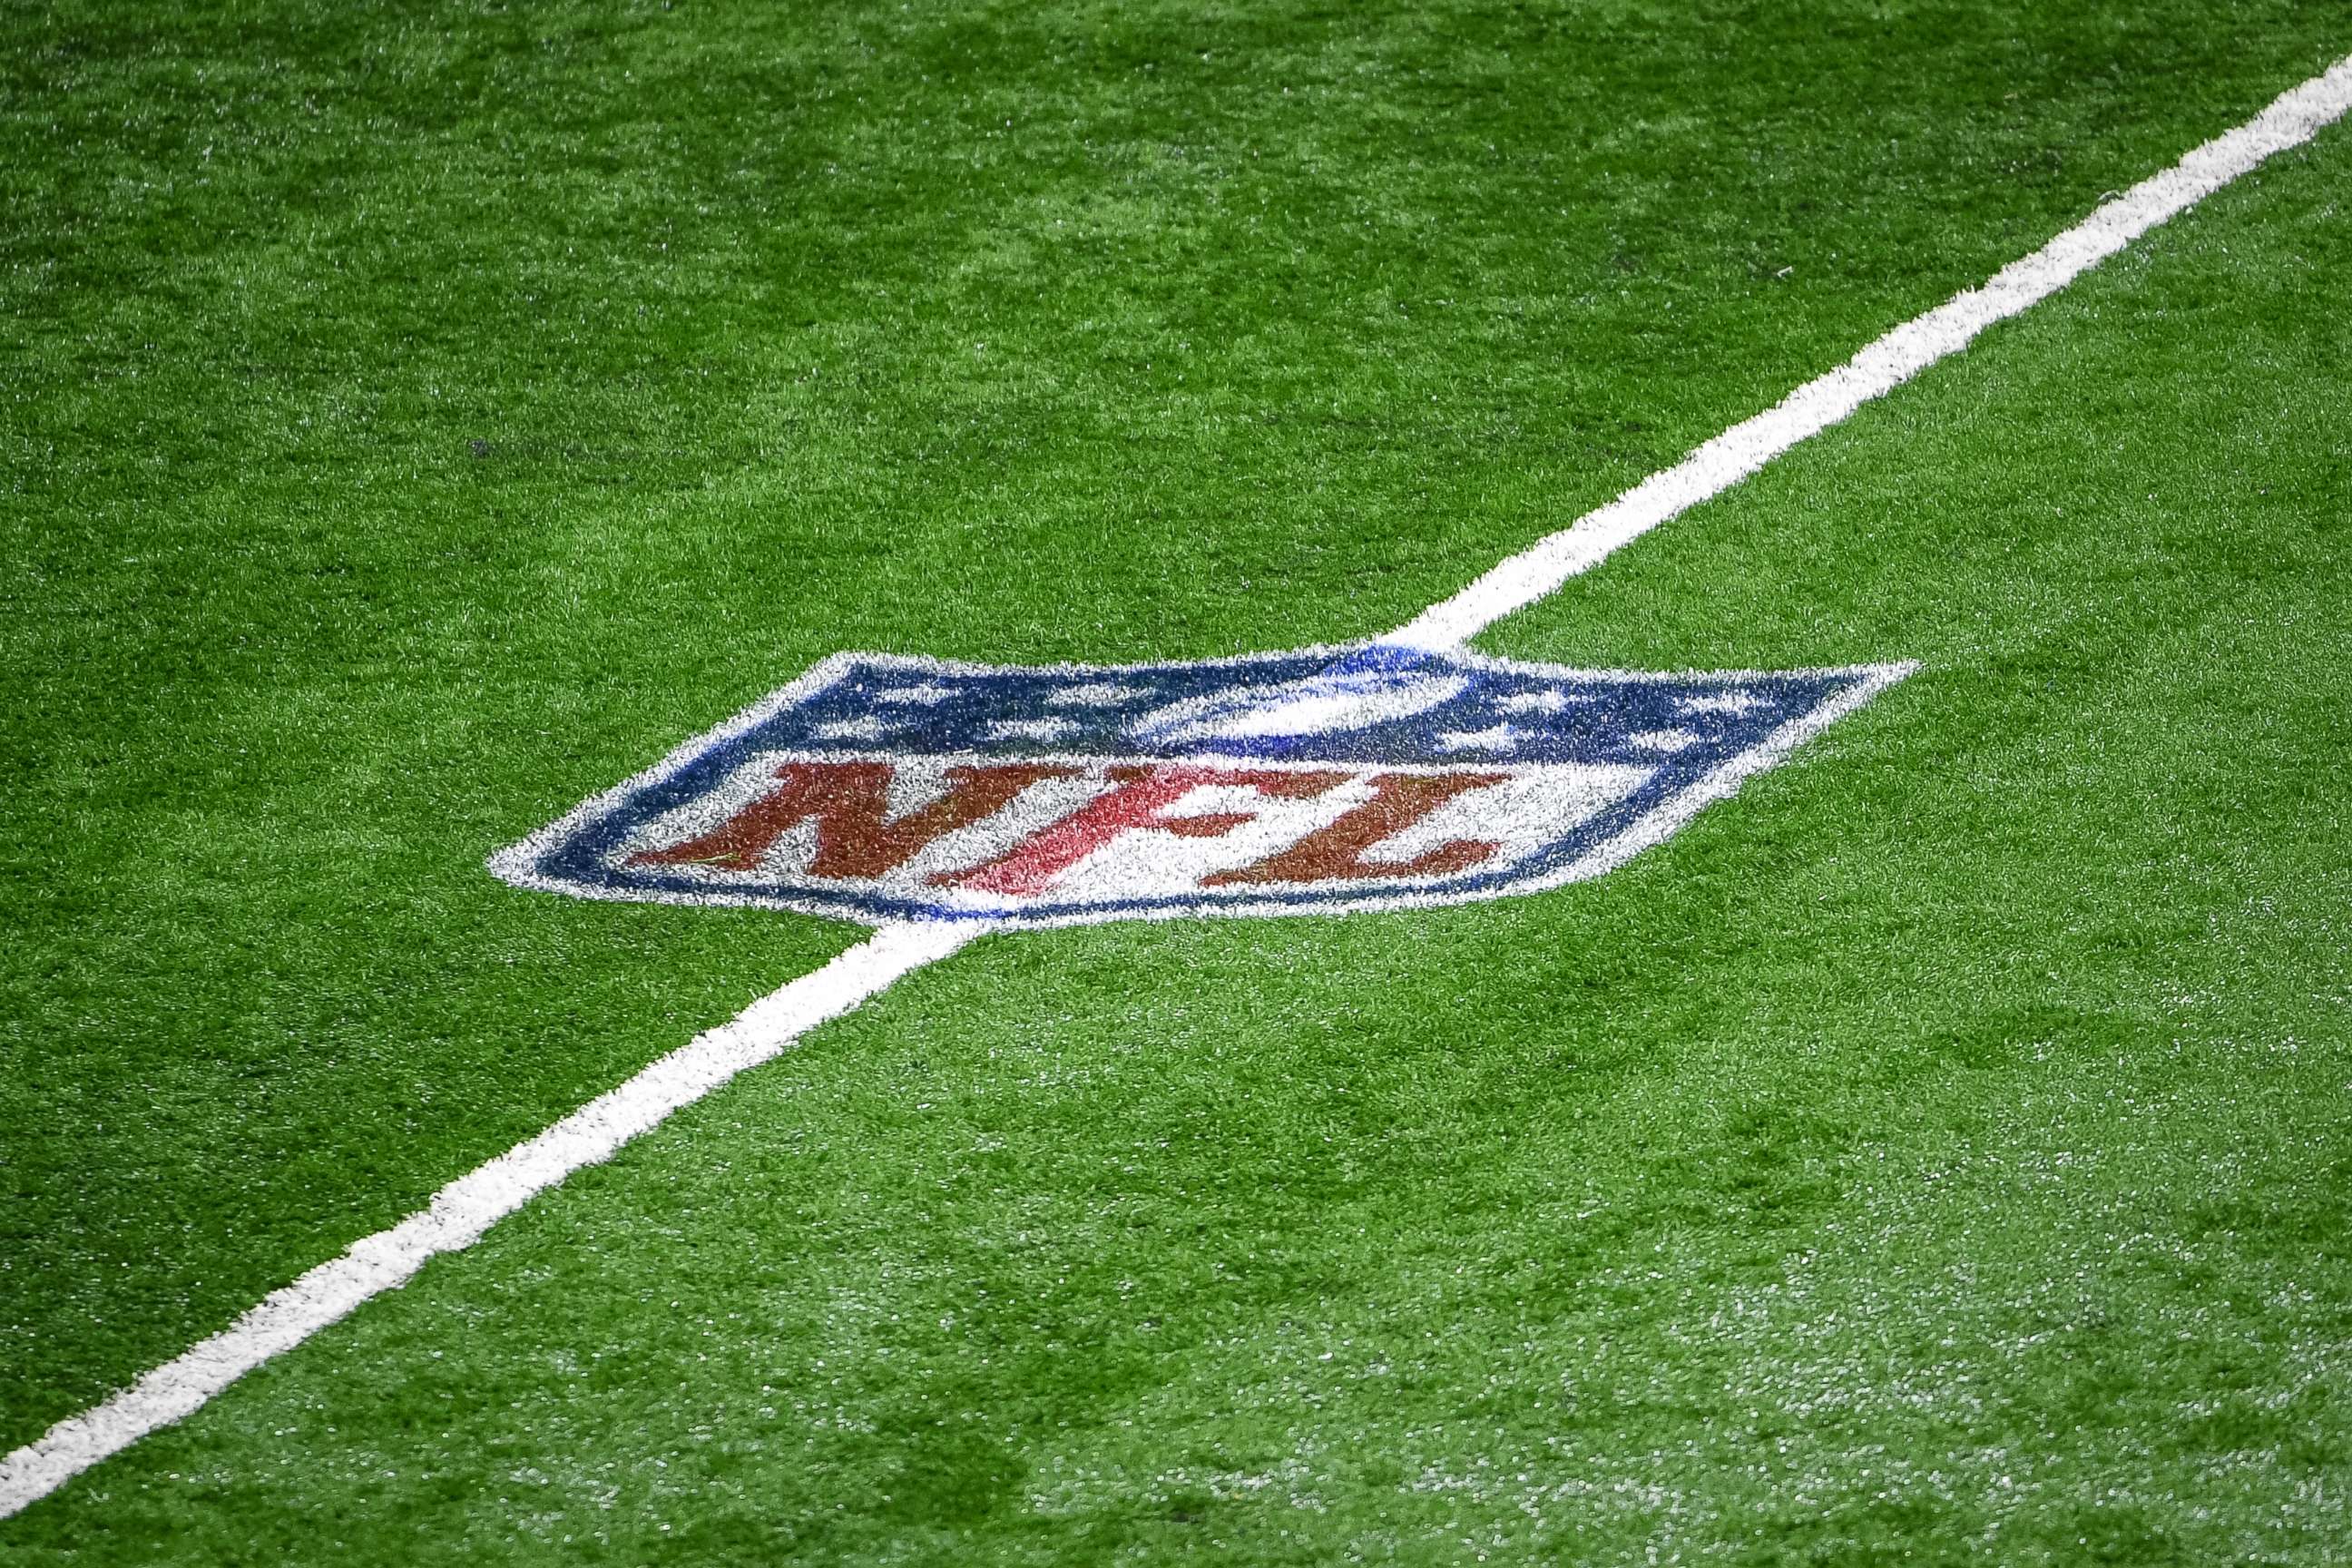 PHOTO: In this Dec. 13, 2020, file photo, the NFL logo is pictured before the first half between the Detroit Lions and Green Bay Packers at Ford Field in Detroit.